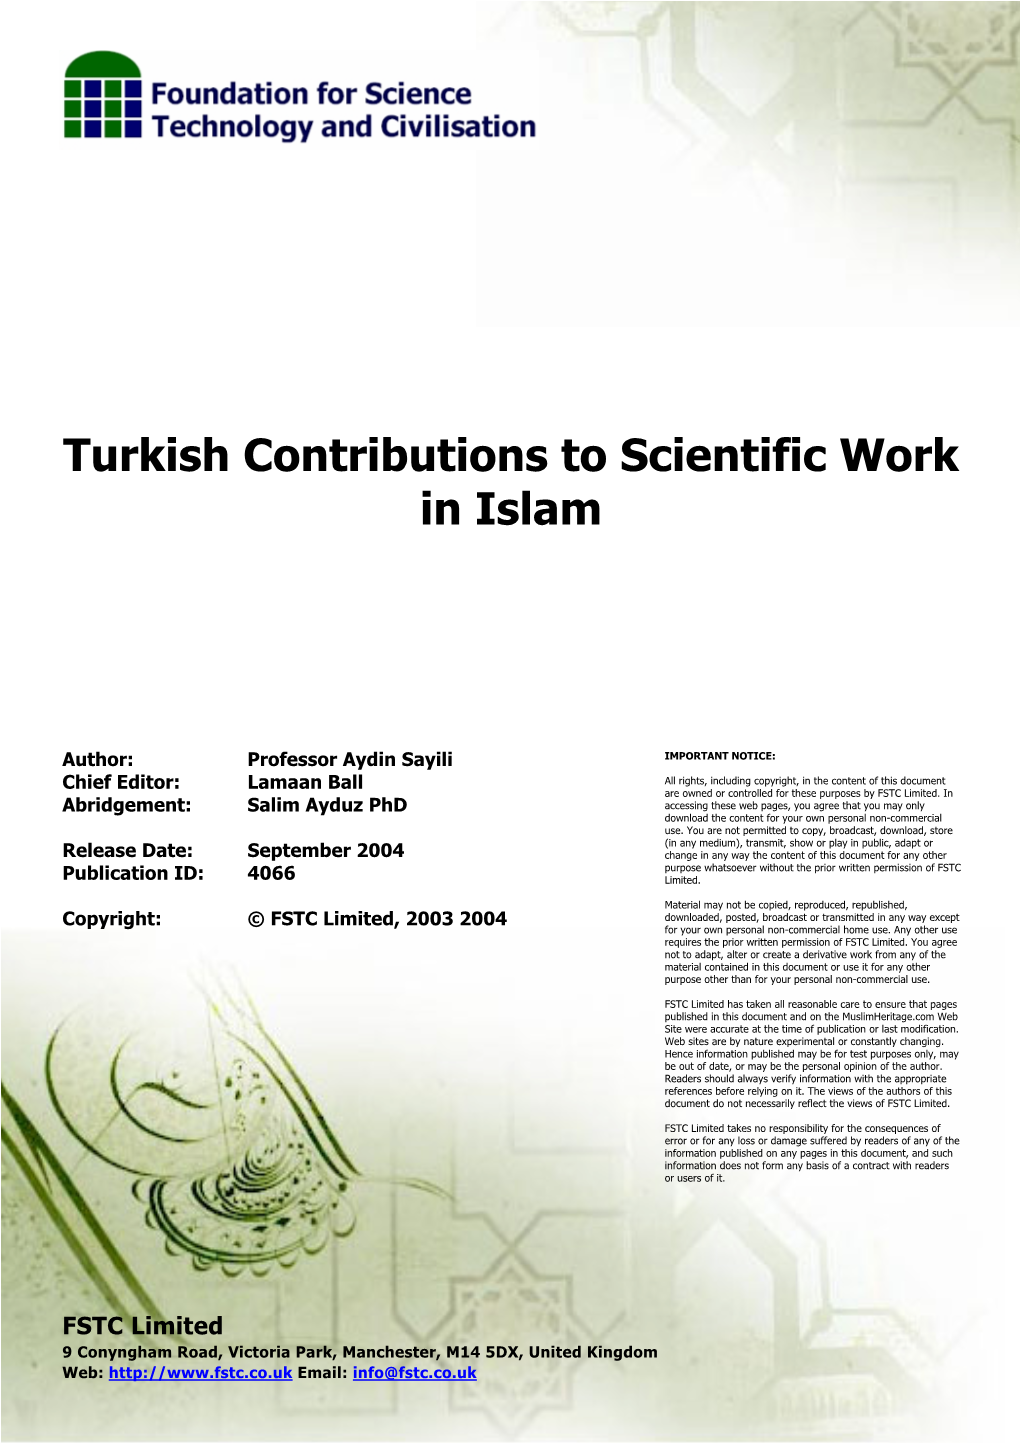 Turkish Contributions to Scientific Work in Islam September 2004